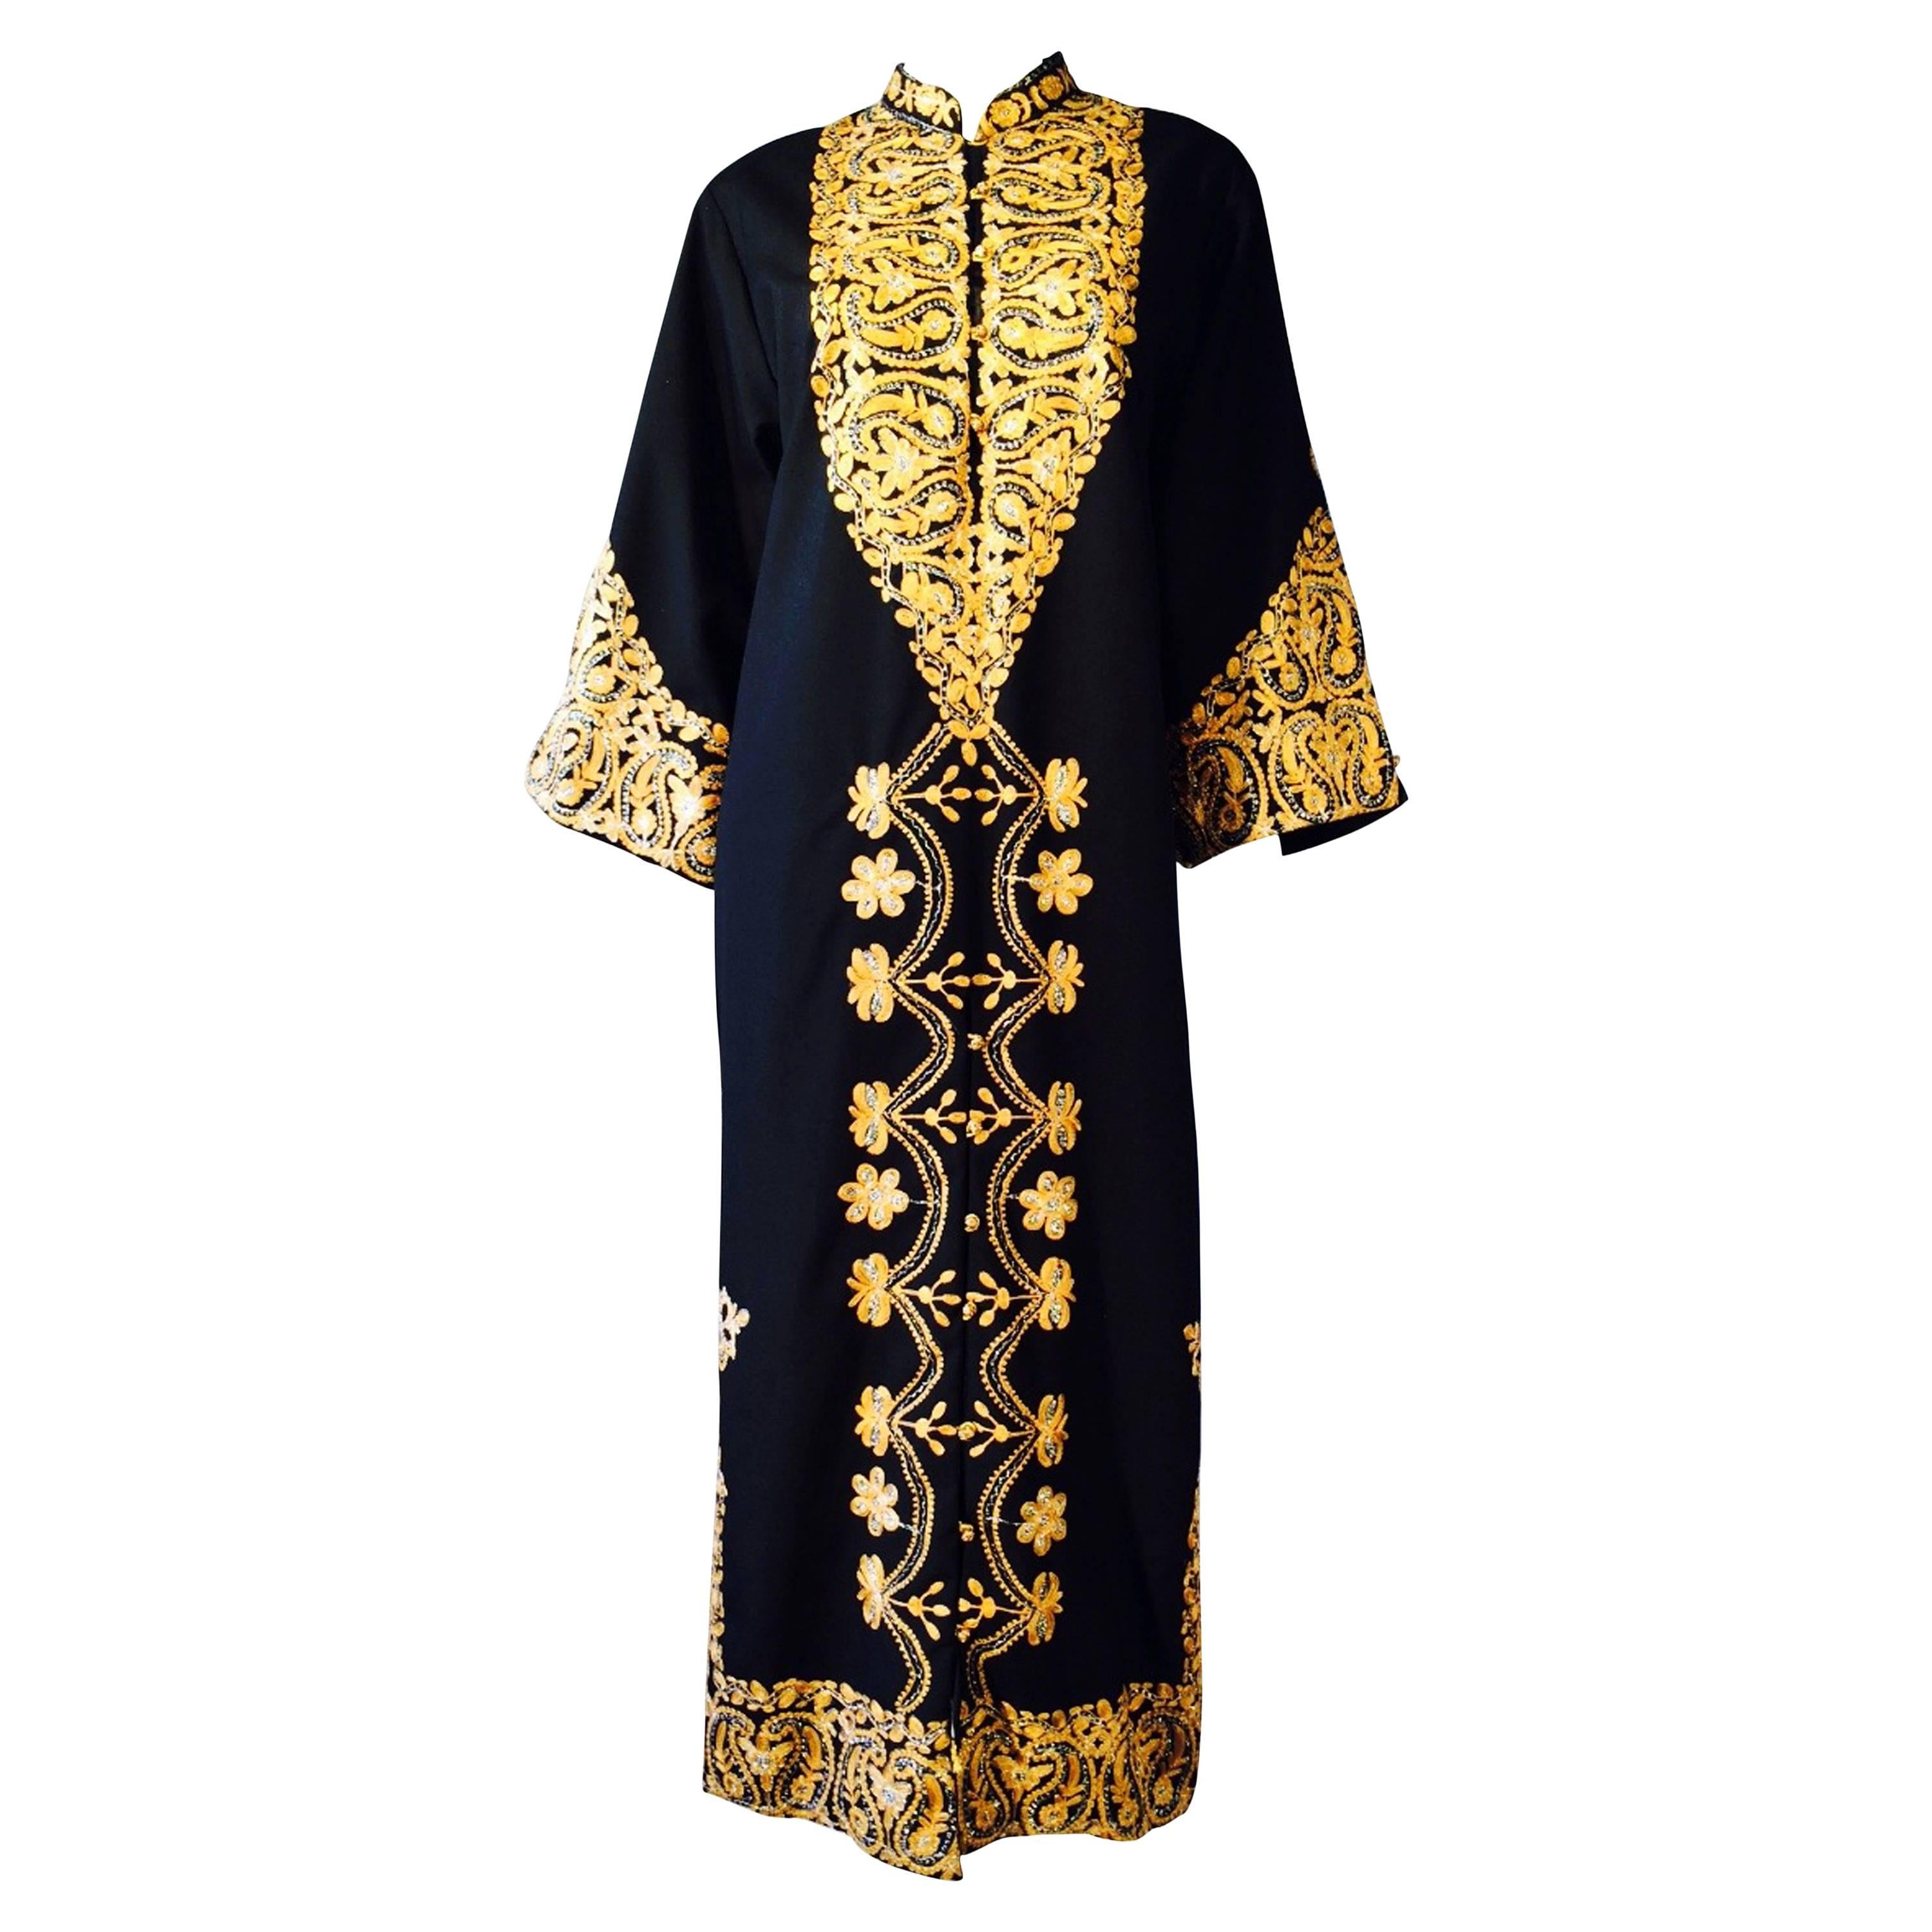 Caftan Presented By King Hassan II of Morocco, Paris 1970